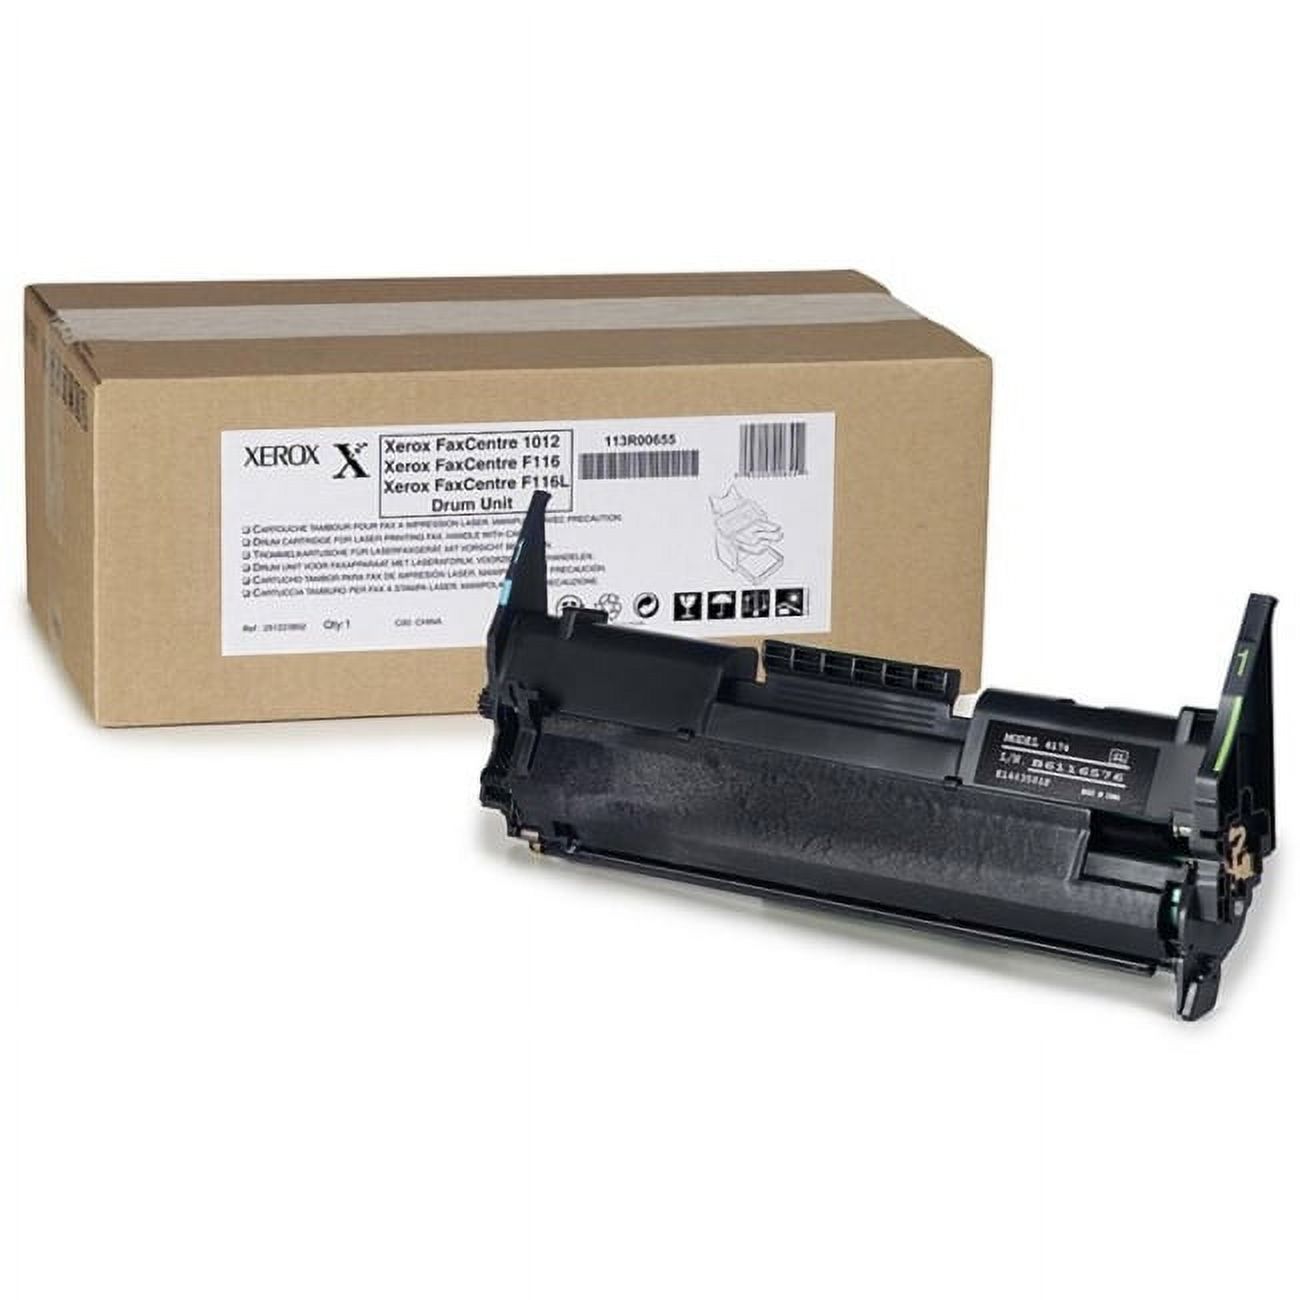 Xerox FaxCentre F116 - Drum kit - for FaxCentre 1012, F116, F116L (Sold without Xerox warranty – We are not affiliated with Xerox Inc.) - image 2 of 3